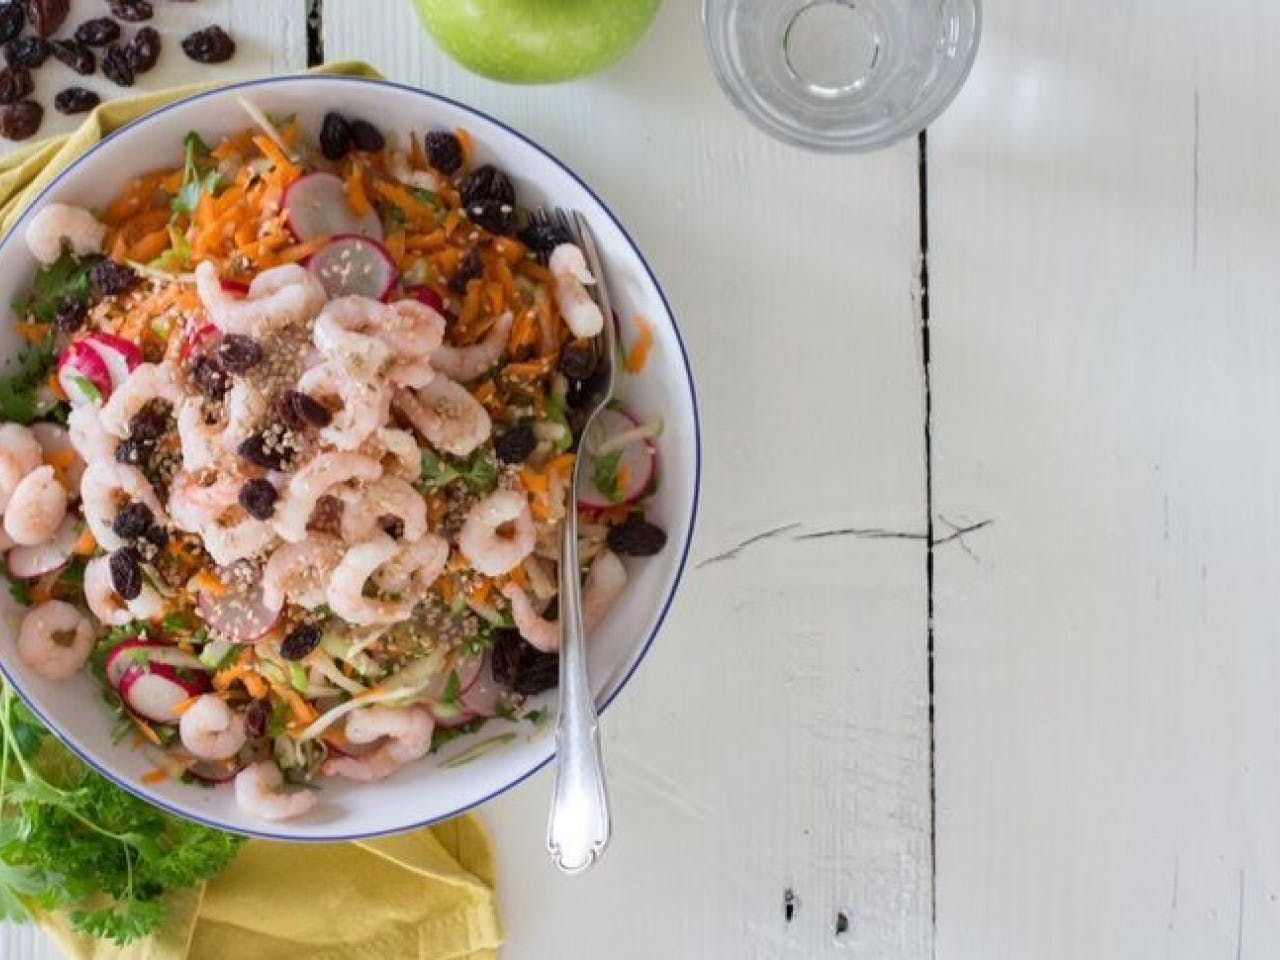 Sweet and sour salad with shrimps